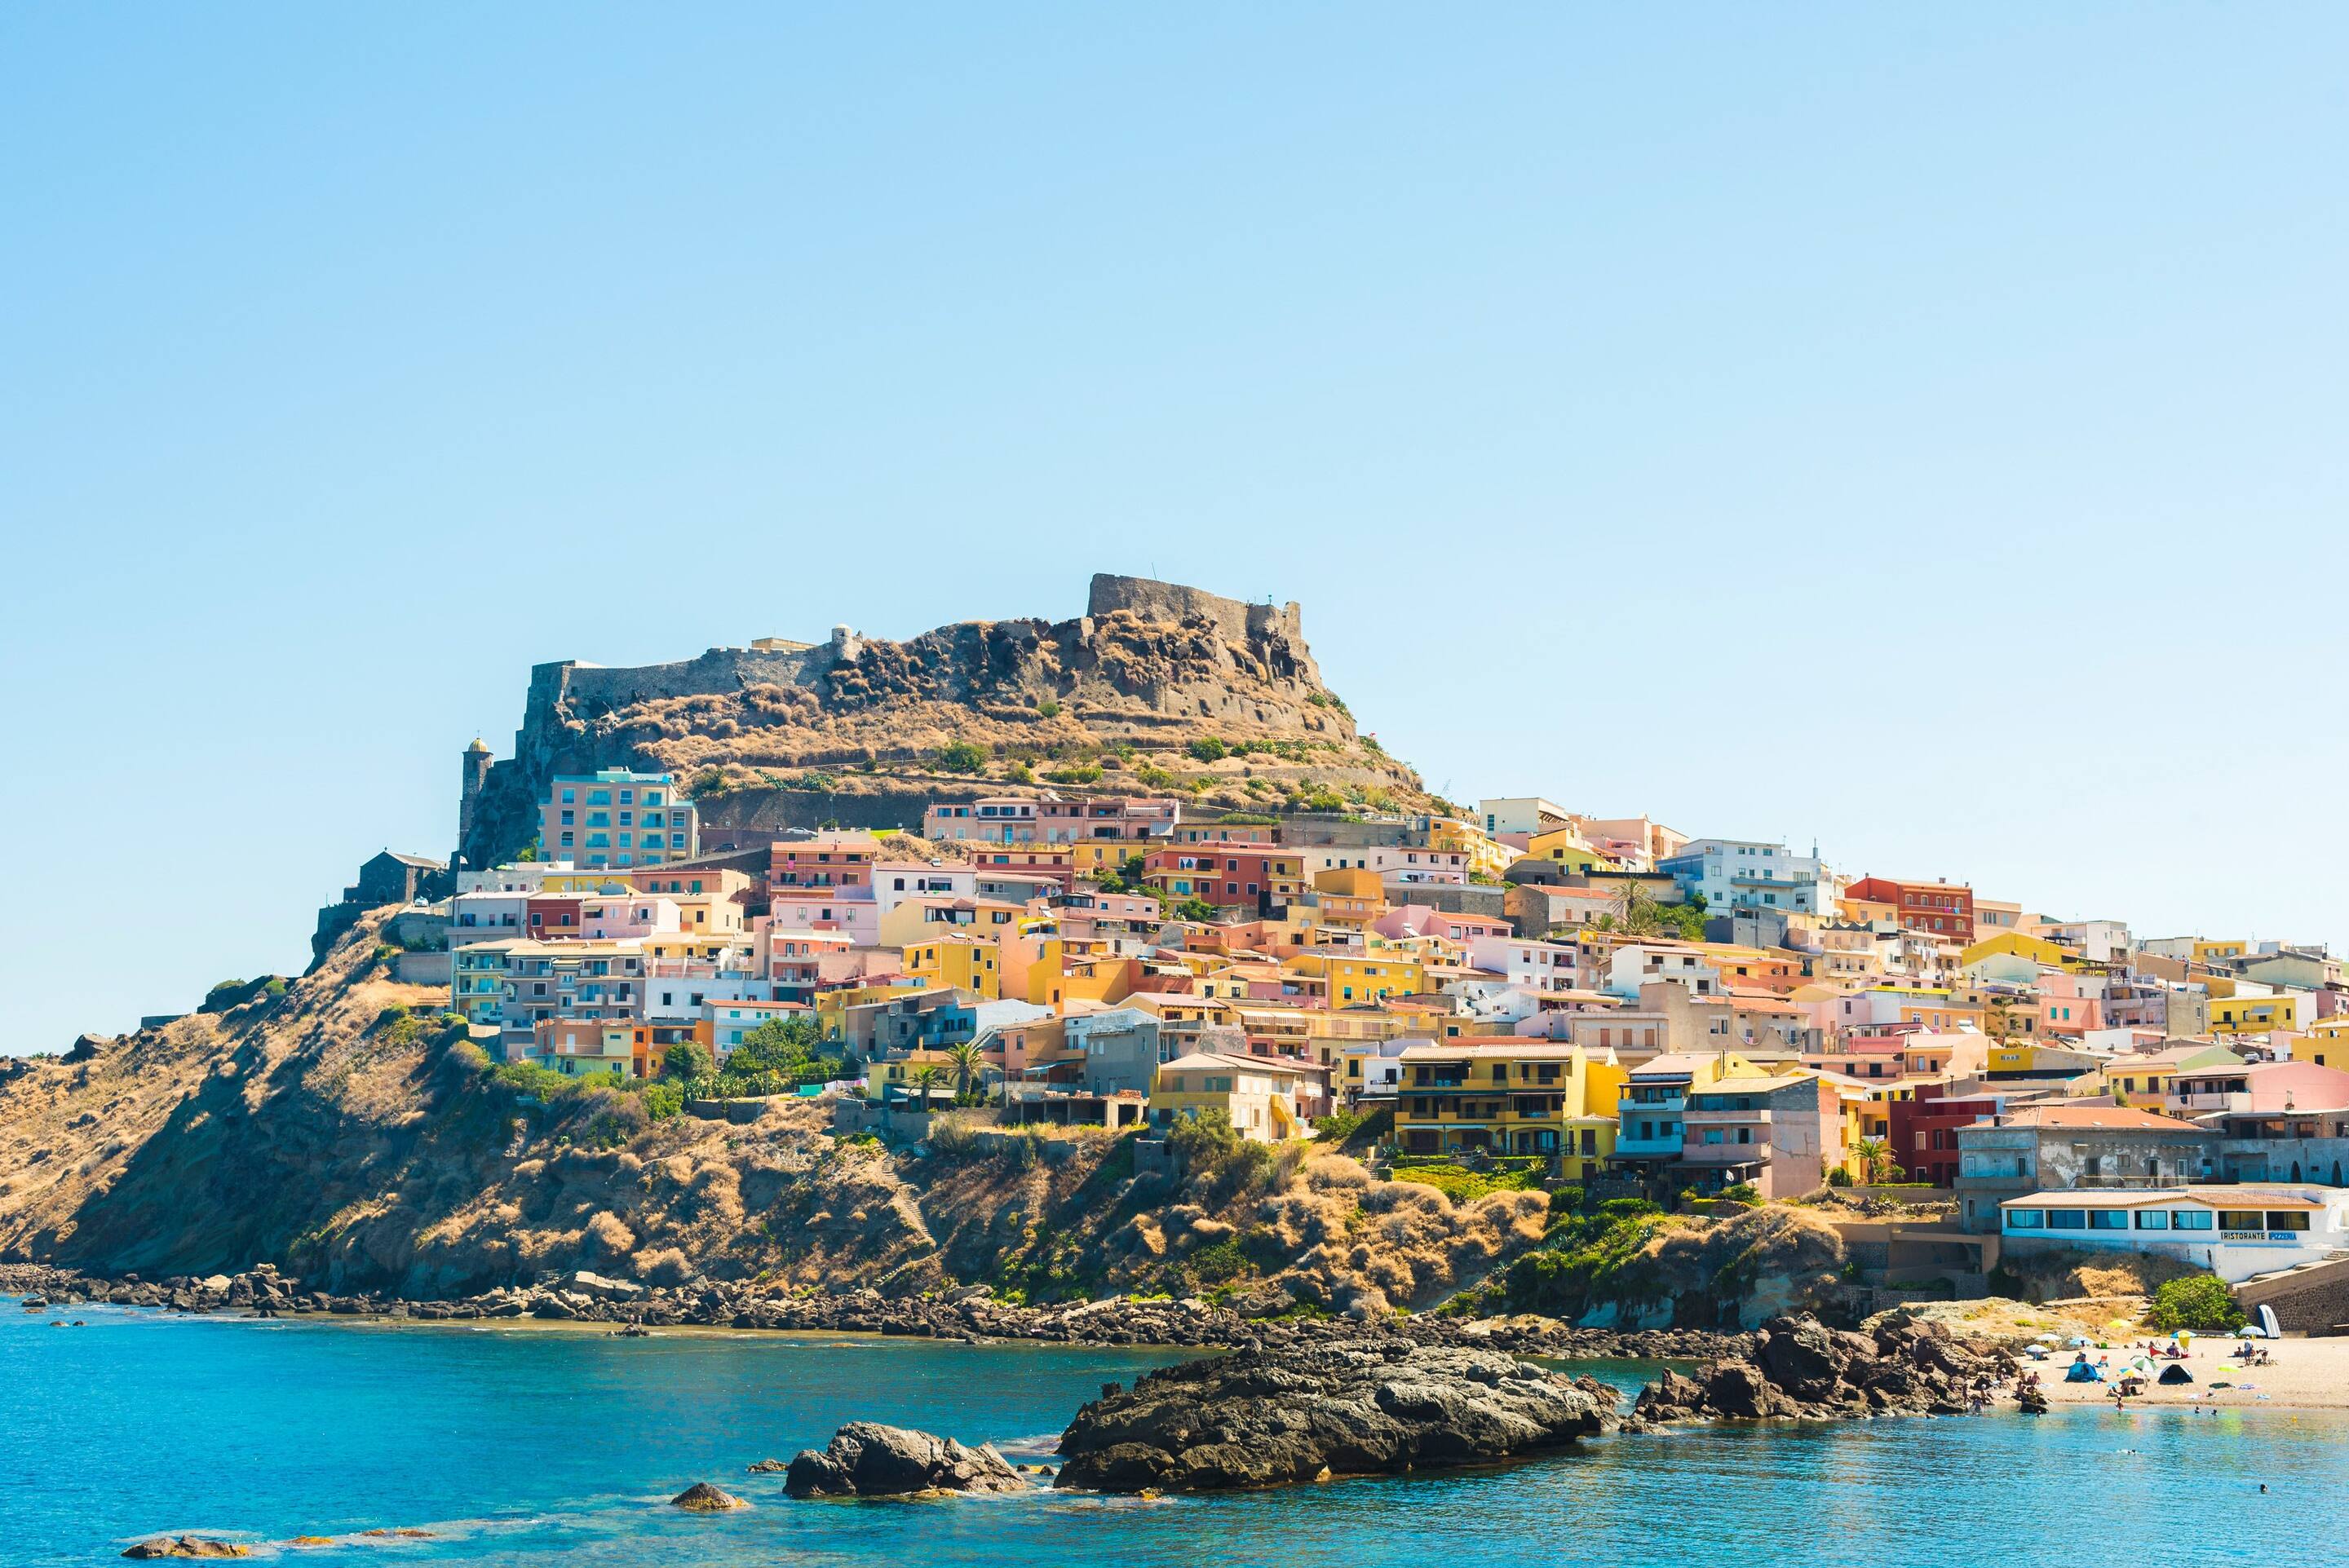 The pastel houses of Castelsardo, Sardinia surrounded by turquoise water